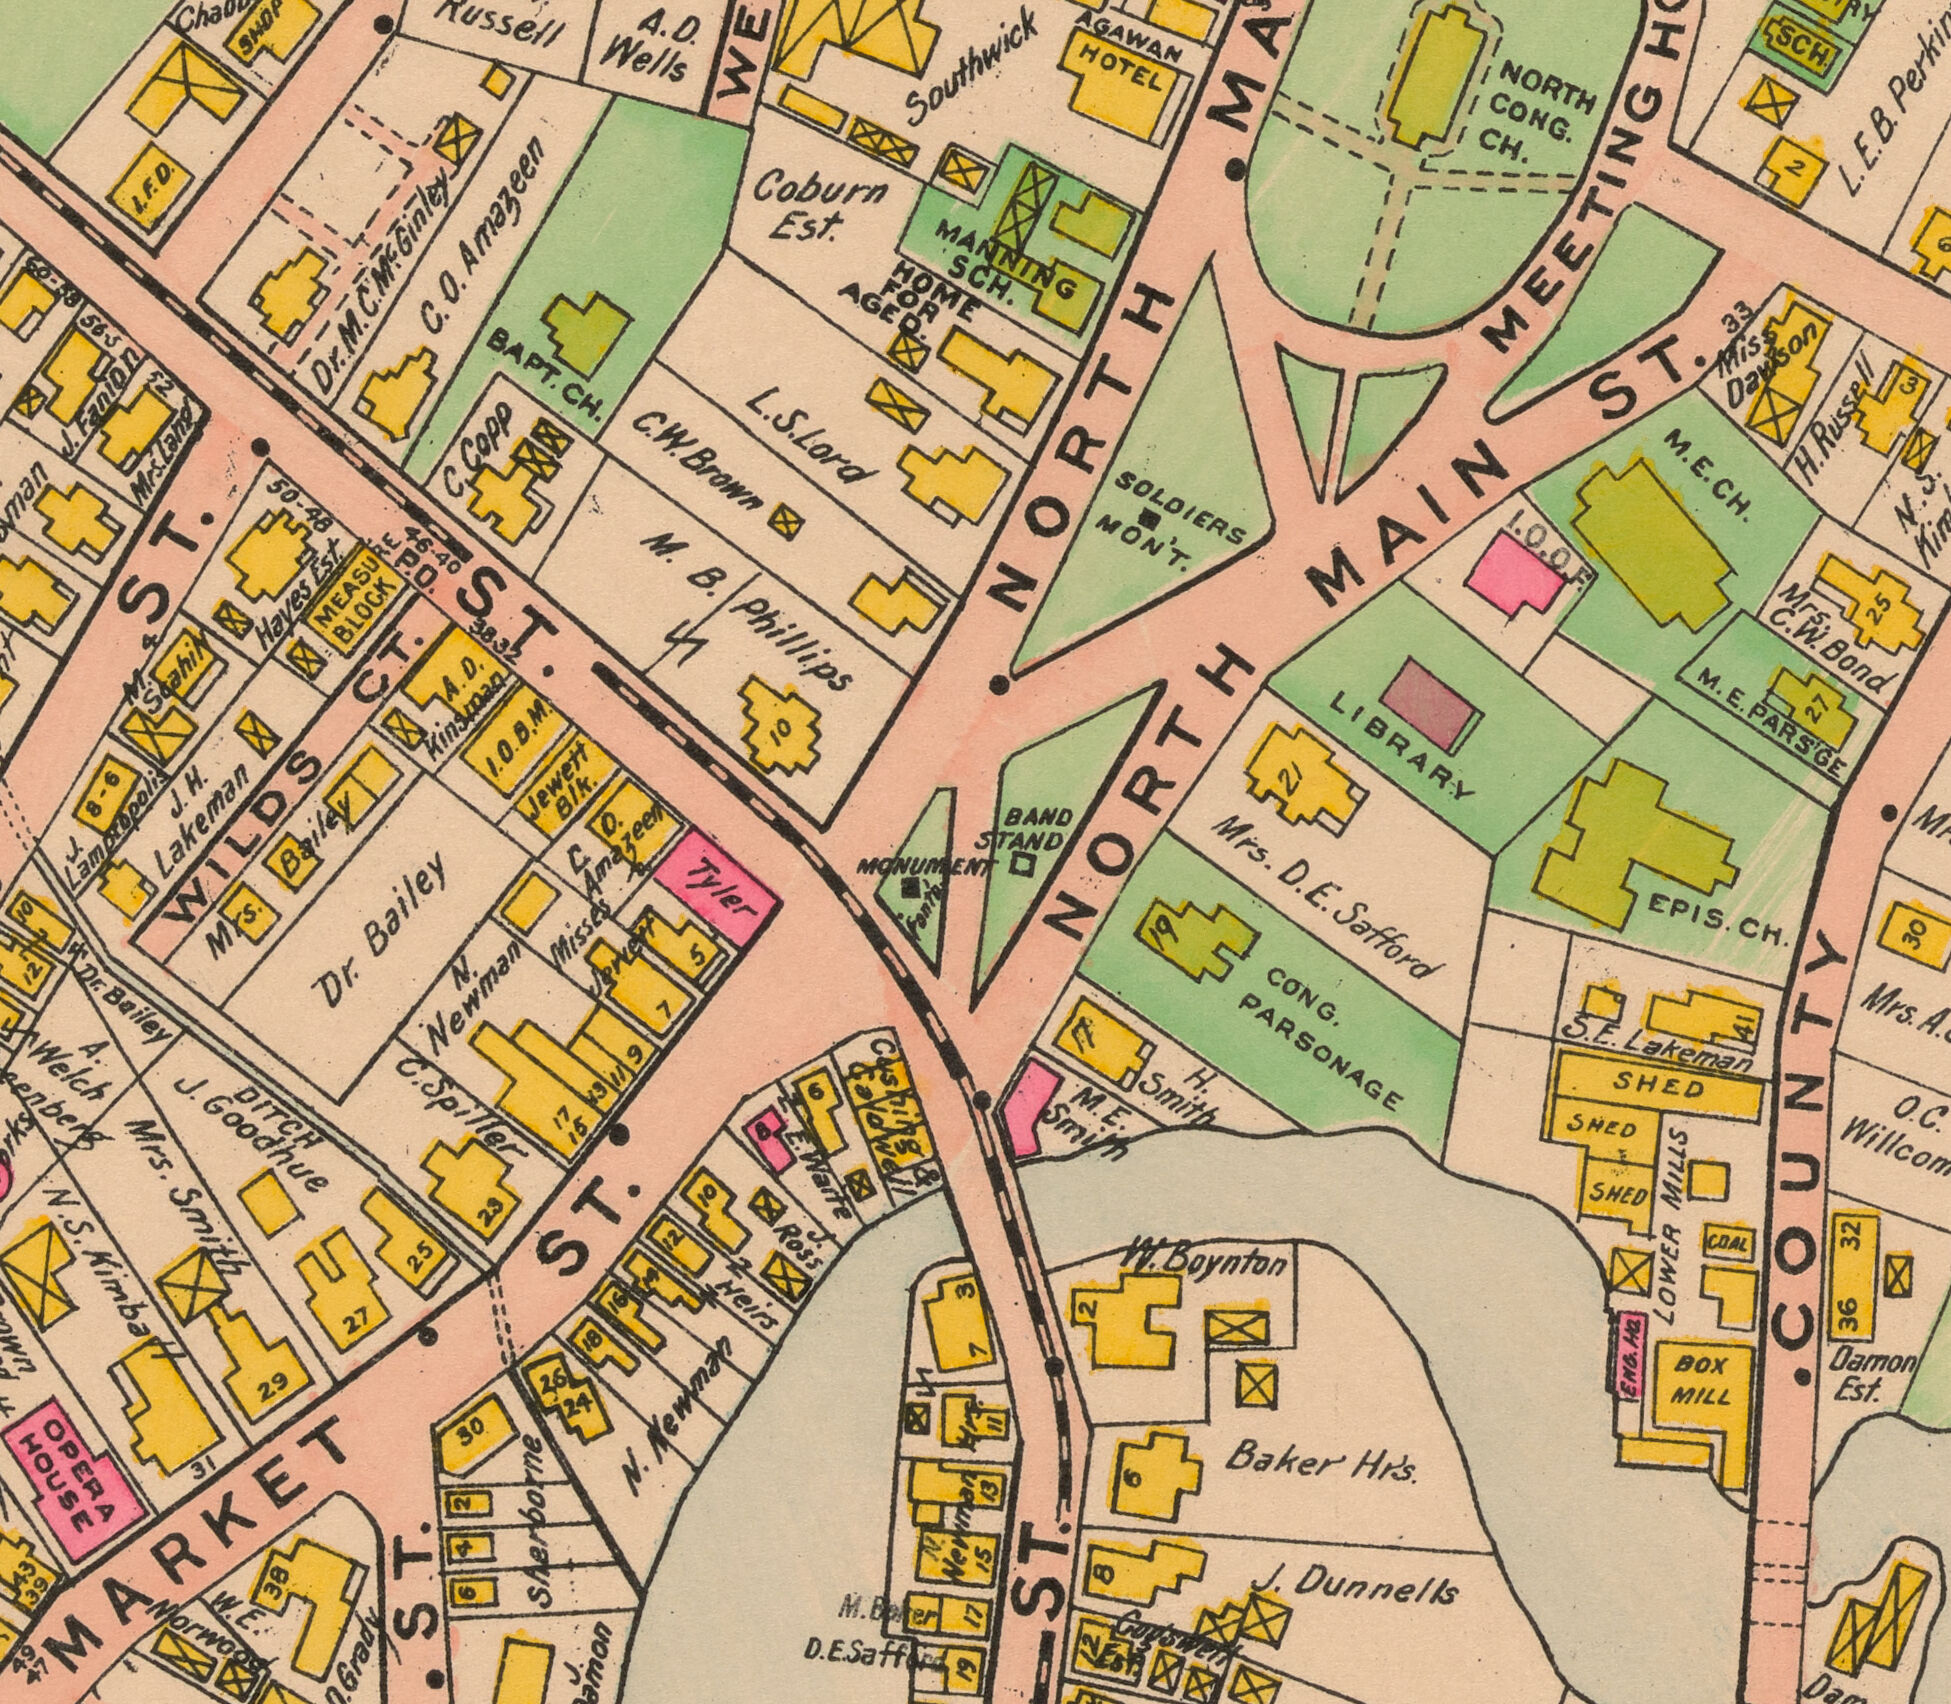 Downtown Ipswich in 1910 closely resembles the streets I&rsquo;m familiar with, minus the Opera House and Box Mill.